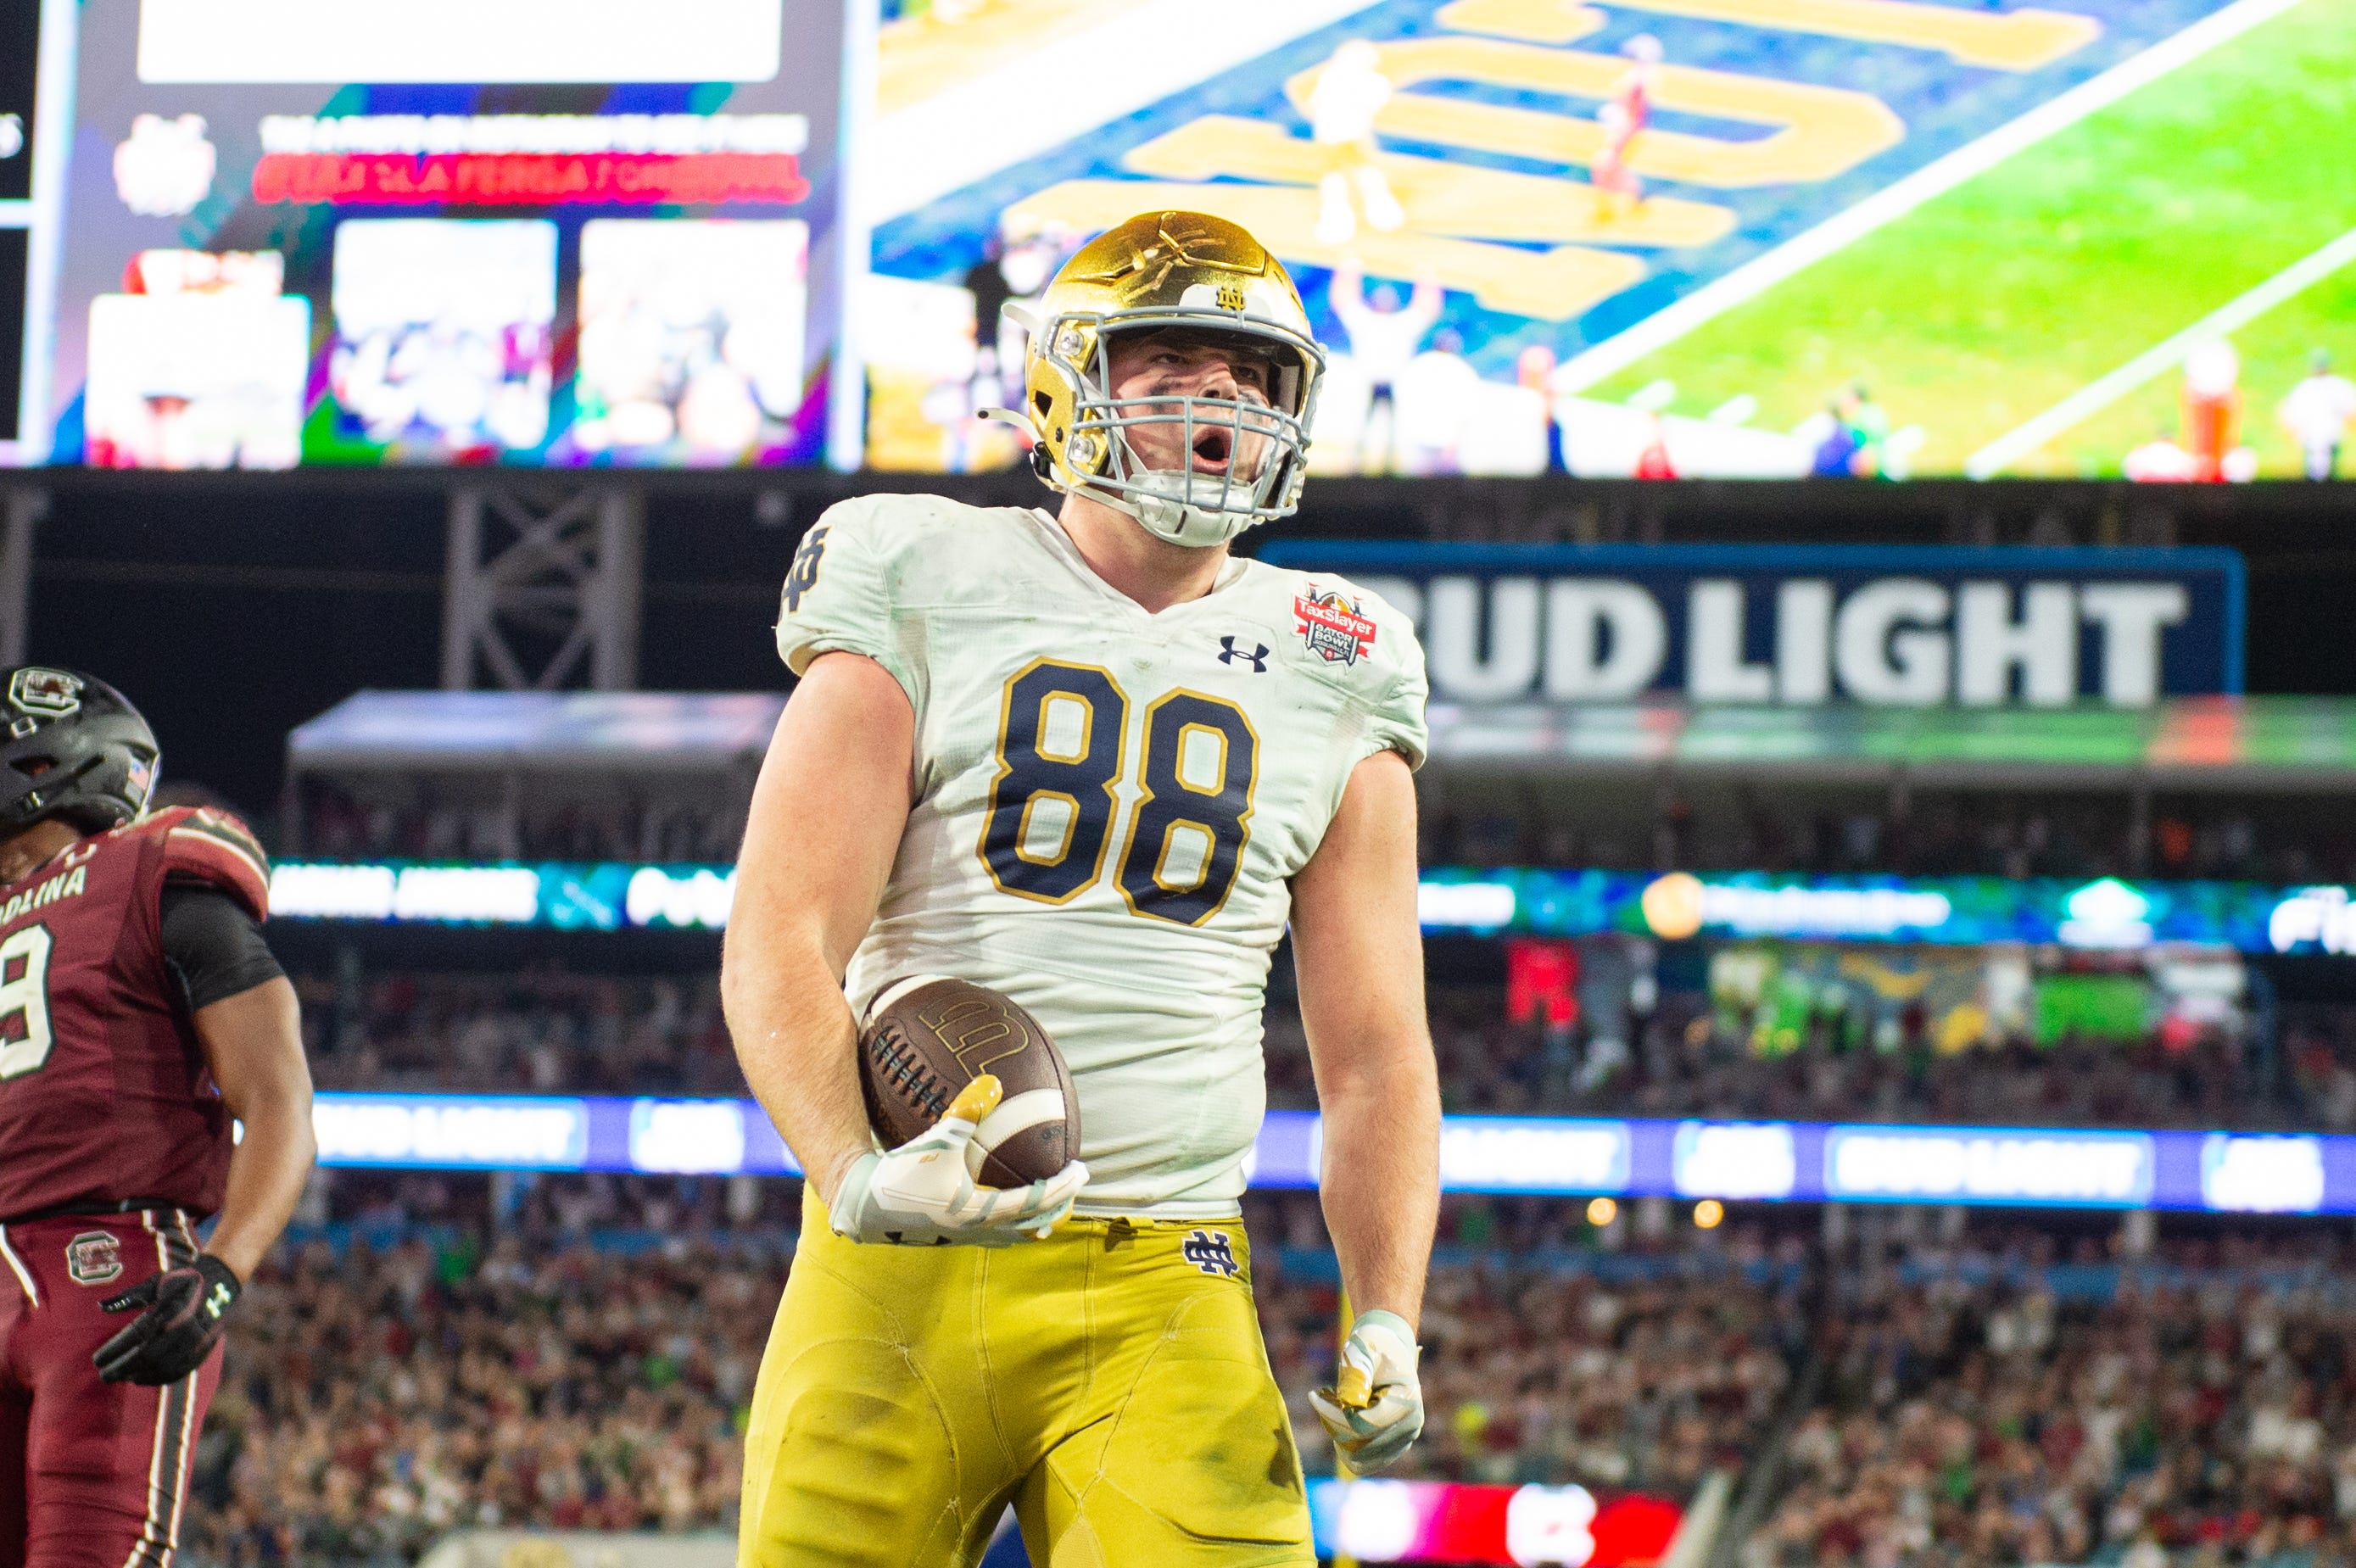 Dec 30, 2022; Jacksonville, FL, USA;Notre Dame Fighting Irish tight end Mitchell Evans (88) celebrates his touchdown against the South Carolina Gamecocks in the fourth quarter in the 2022 Gator Bowl at TIAA Bank Field. Mandatory Credit: Jeremy Reper-USA TODAY Sports